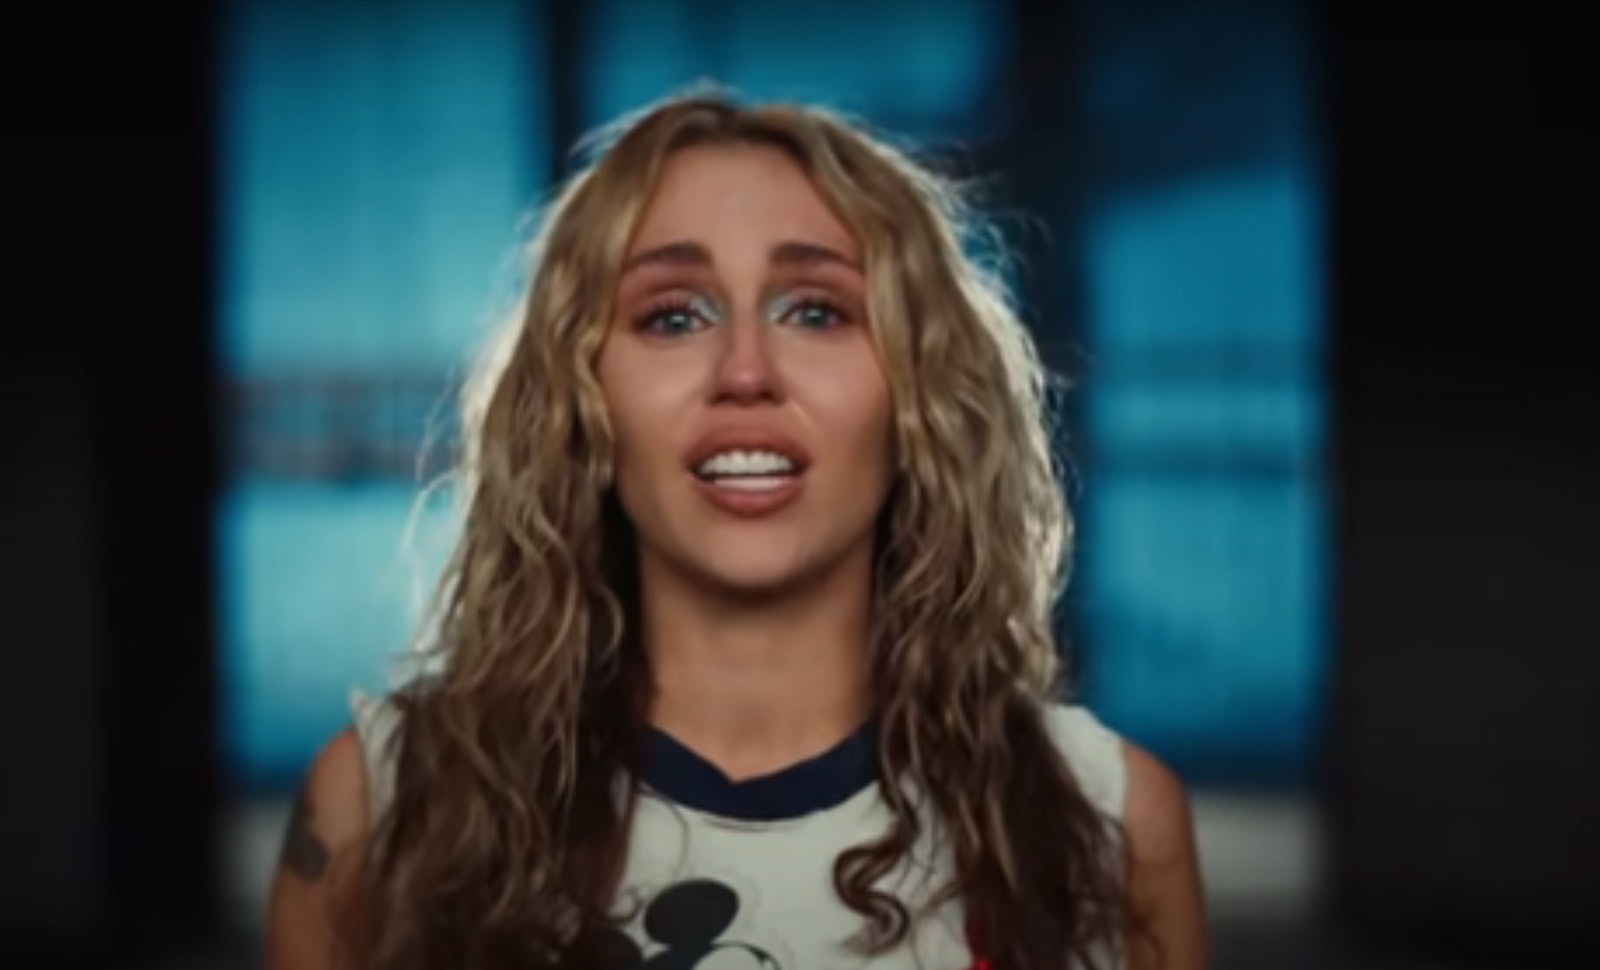 Miley Cyrus' "Used To Be Young" music video includes a Disney Easter egg.